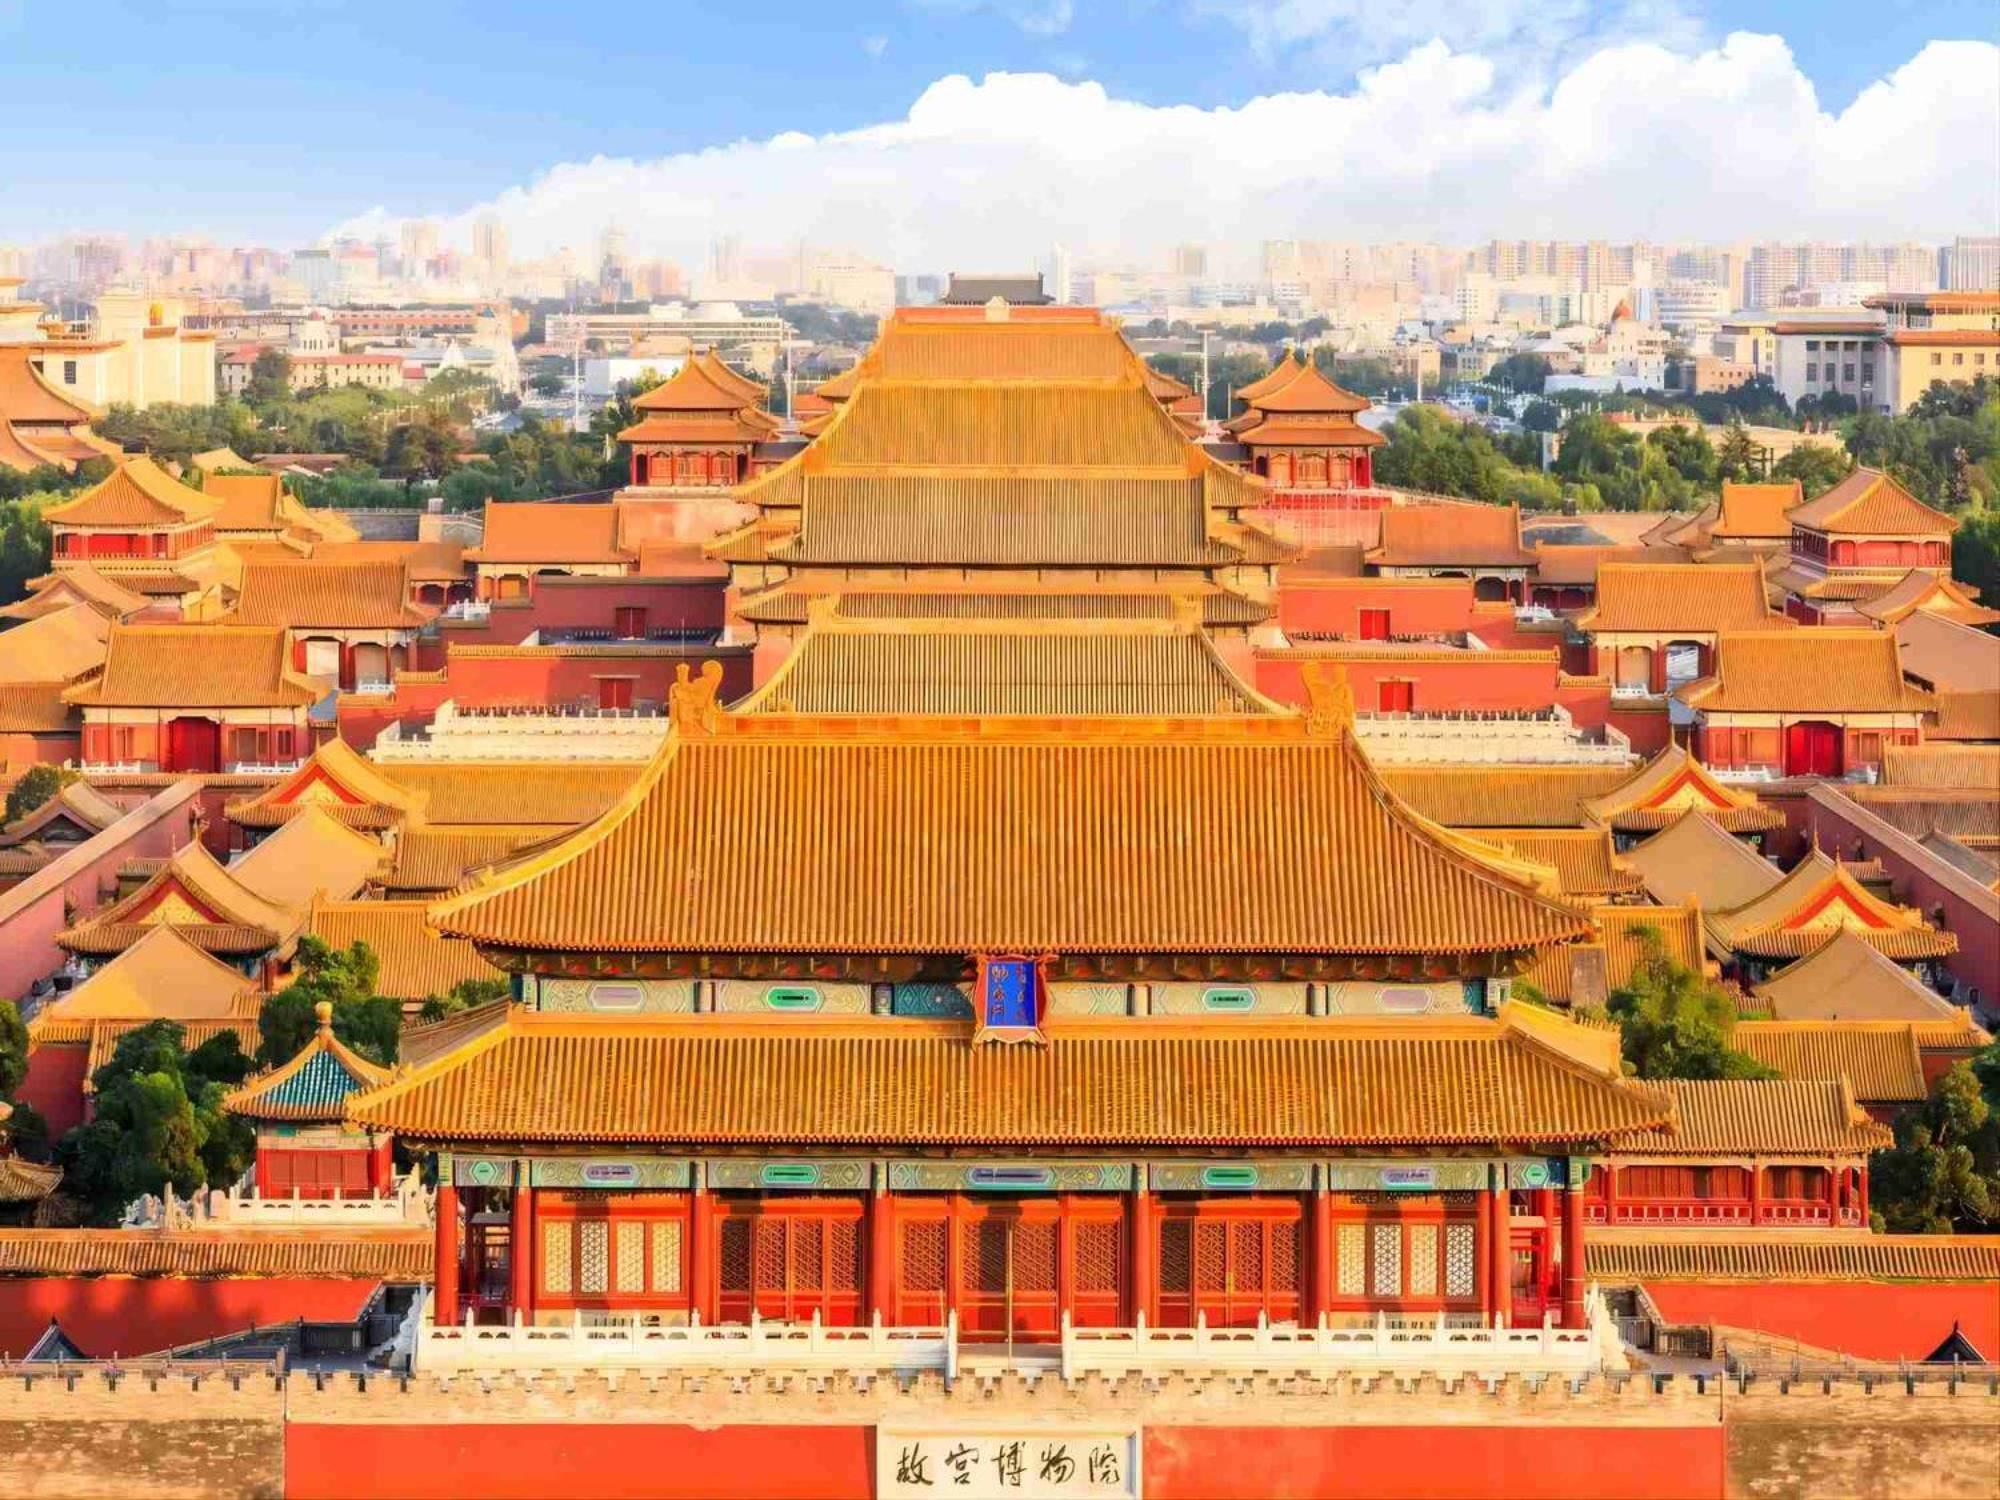 Happy Dragon City Culture Hotel -In The City Center With Ticket Service&Food Recommendation,Near Tian'Anmen Forbidden City,Wangfujing Walking Street,Easy To Get Any Tour Sights In بكين المظهر الخارجي الصورة